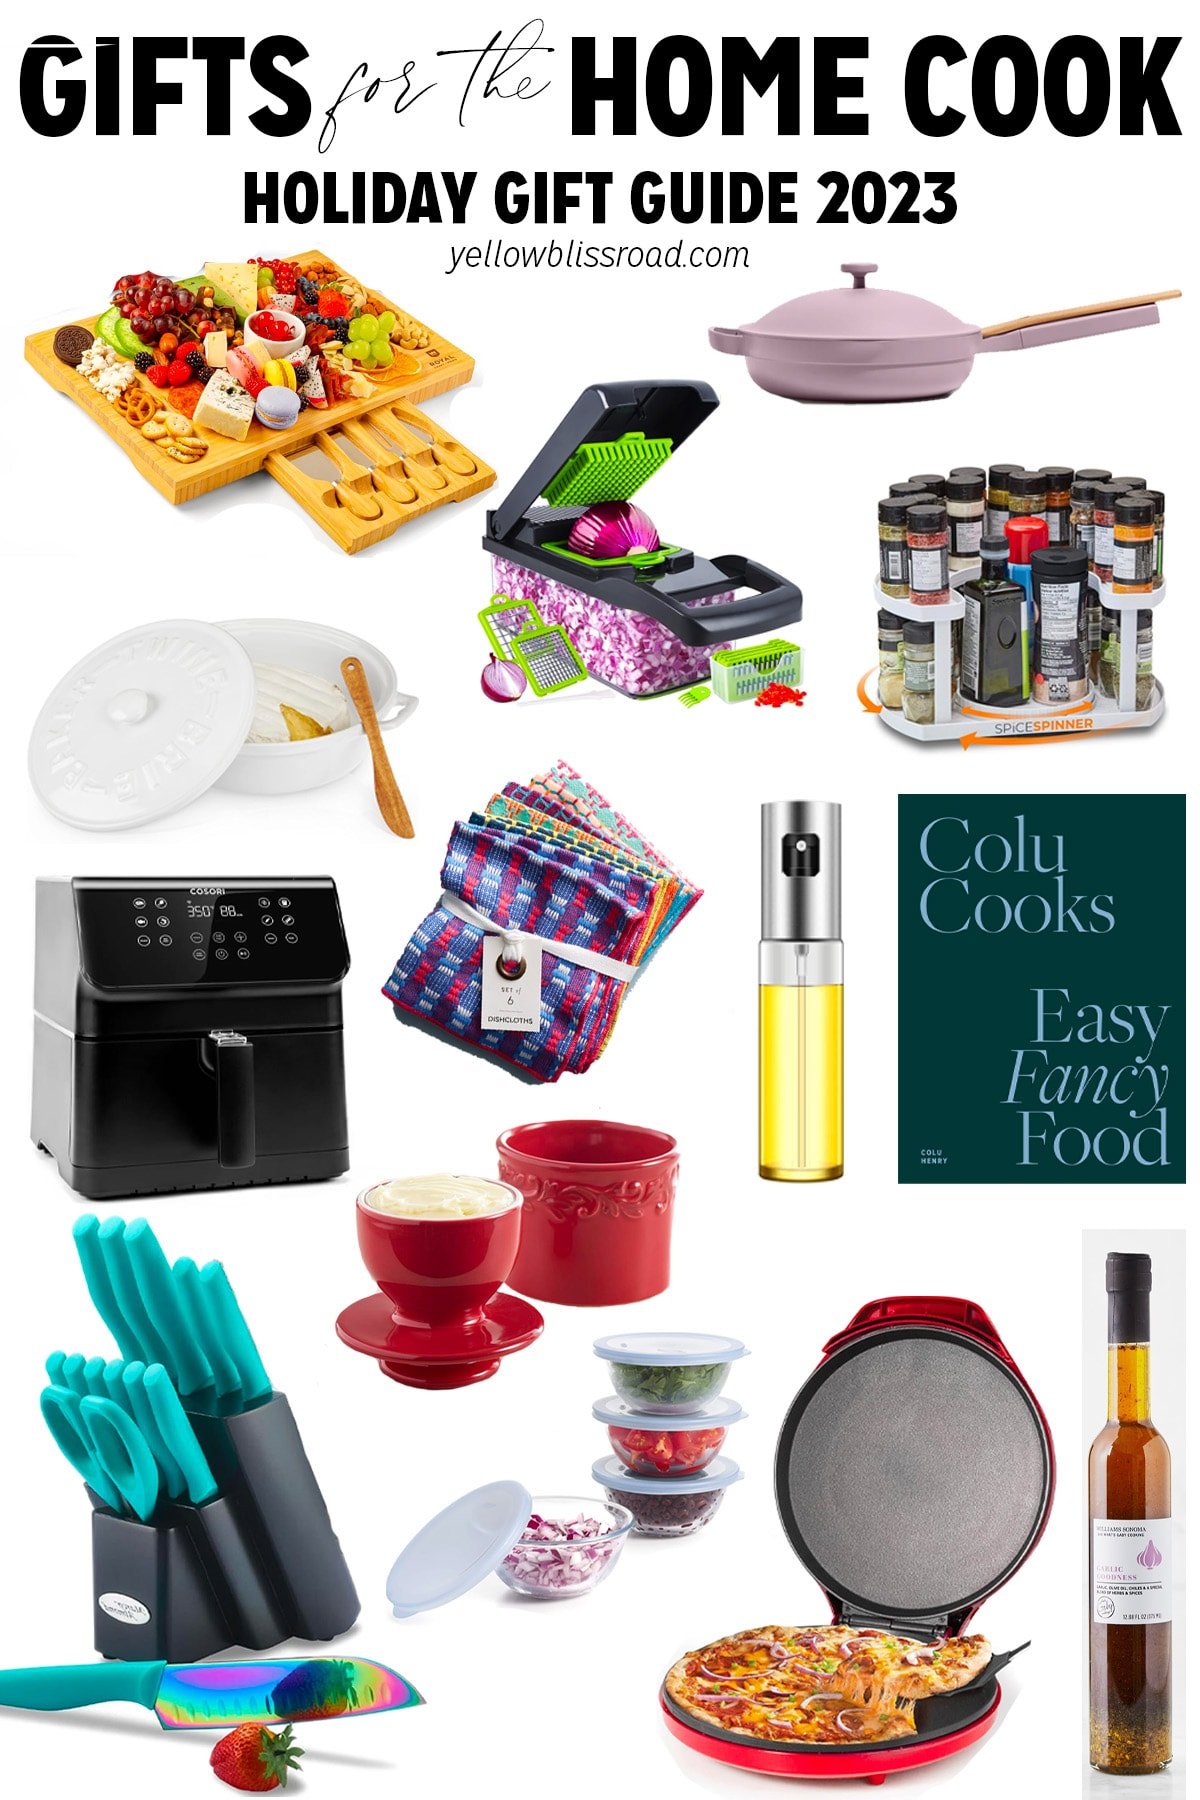 2023 Holiday Gift Guide For Home Cooks and Food Lovers